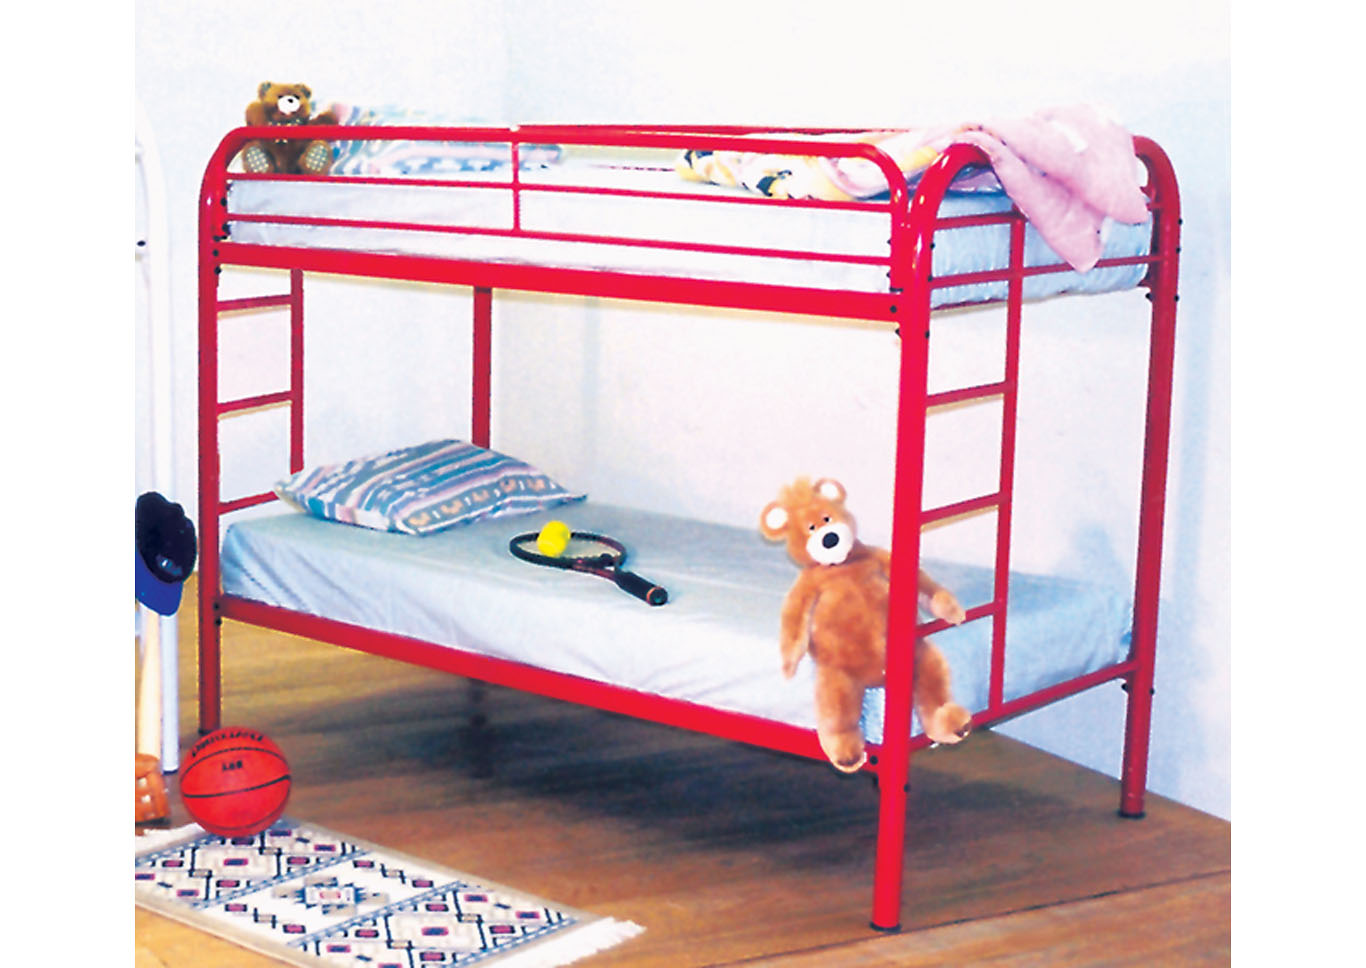 Red Rainbow Twin Bed w/ Frm,Mainline